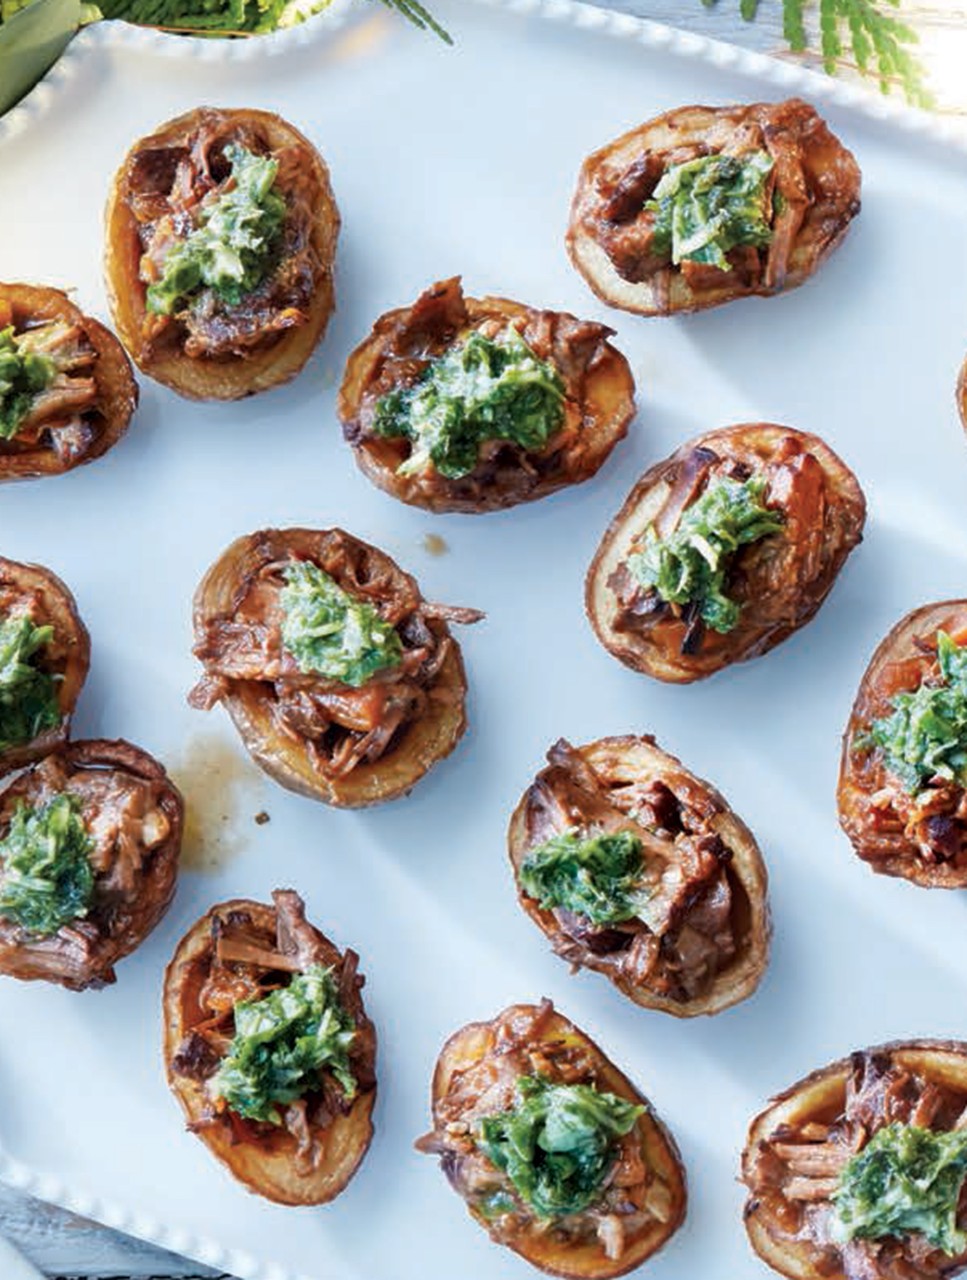 Red Wine-Braised Beef in Potato Skins